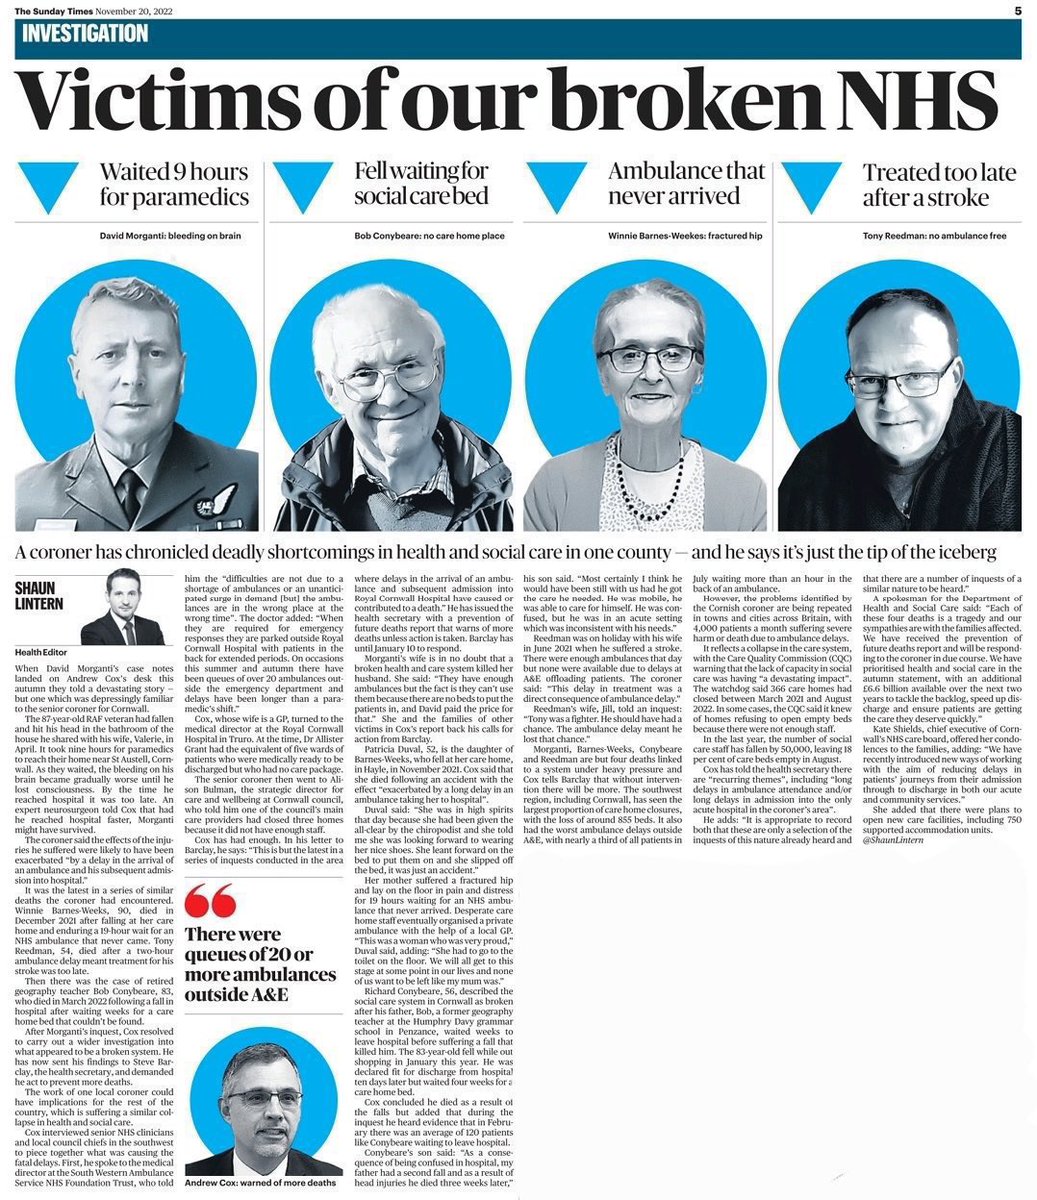 Dear 🇬🇧, An estimated 17,500 people have now died this year from preventable A&E/ambulance delays, here in the 6th wealthiest country on earth. 17,500 people. Dead. Due to govt neglect of the NHS. Wake up. Your family isn't safe in #ToryBritain. #SOSNHS